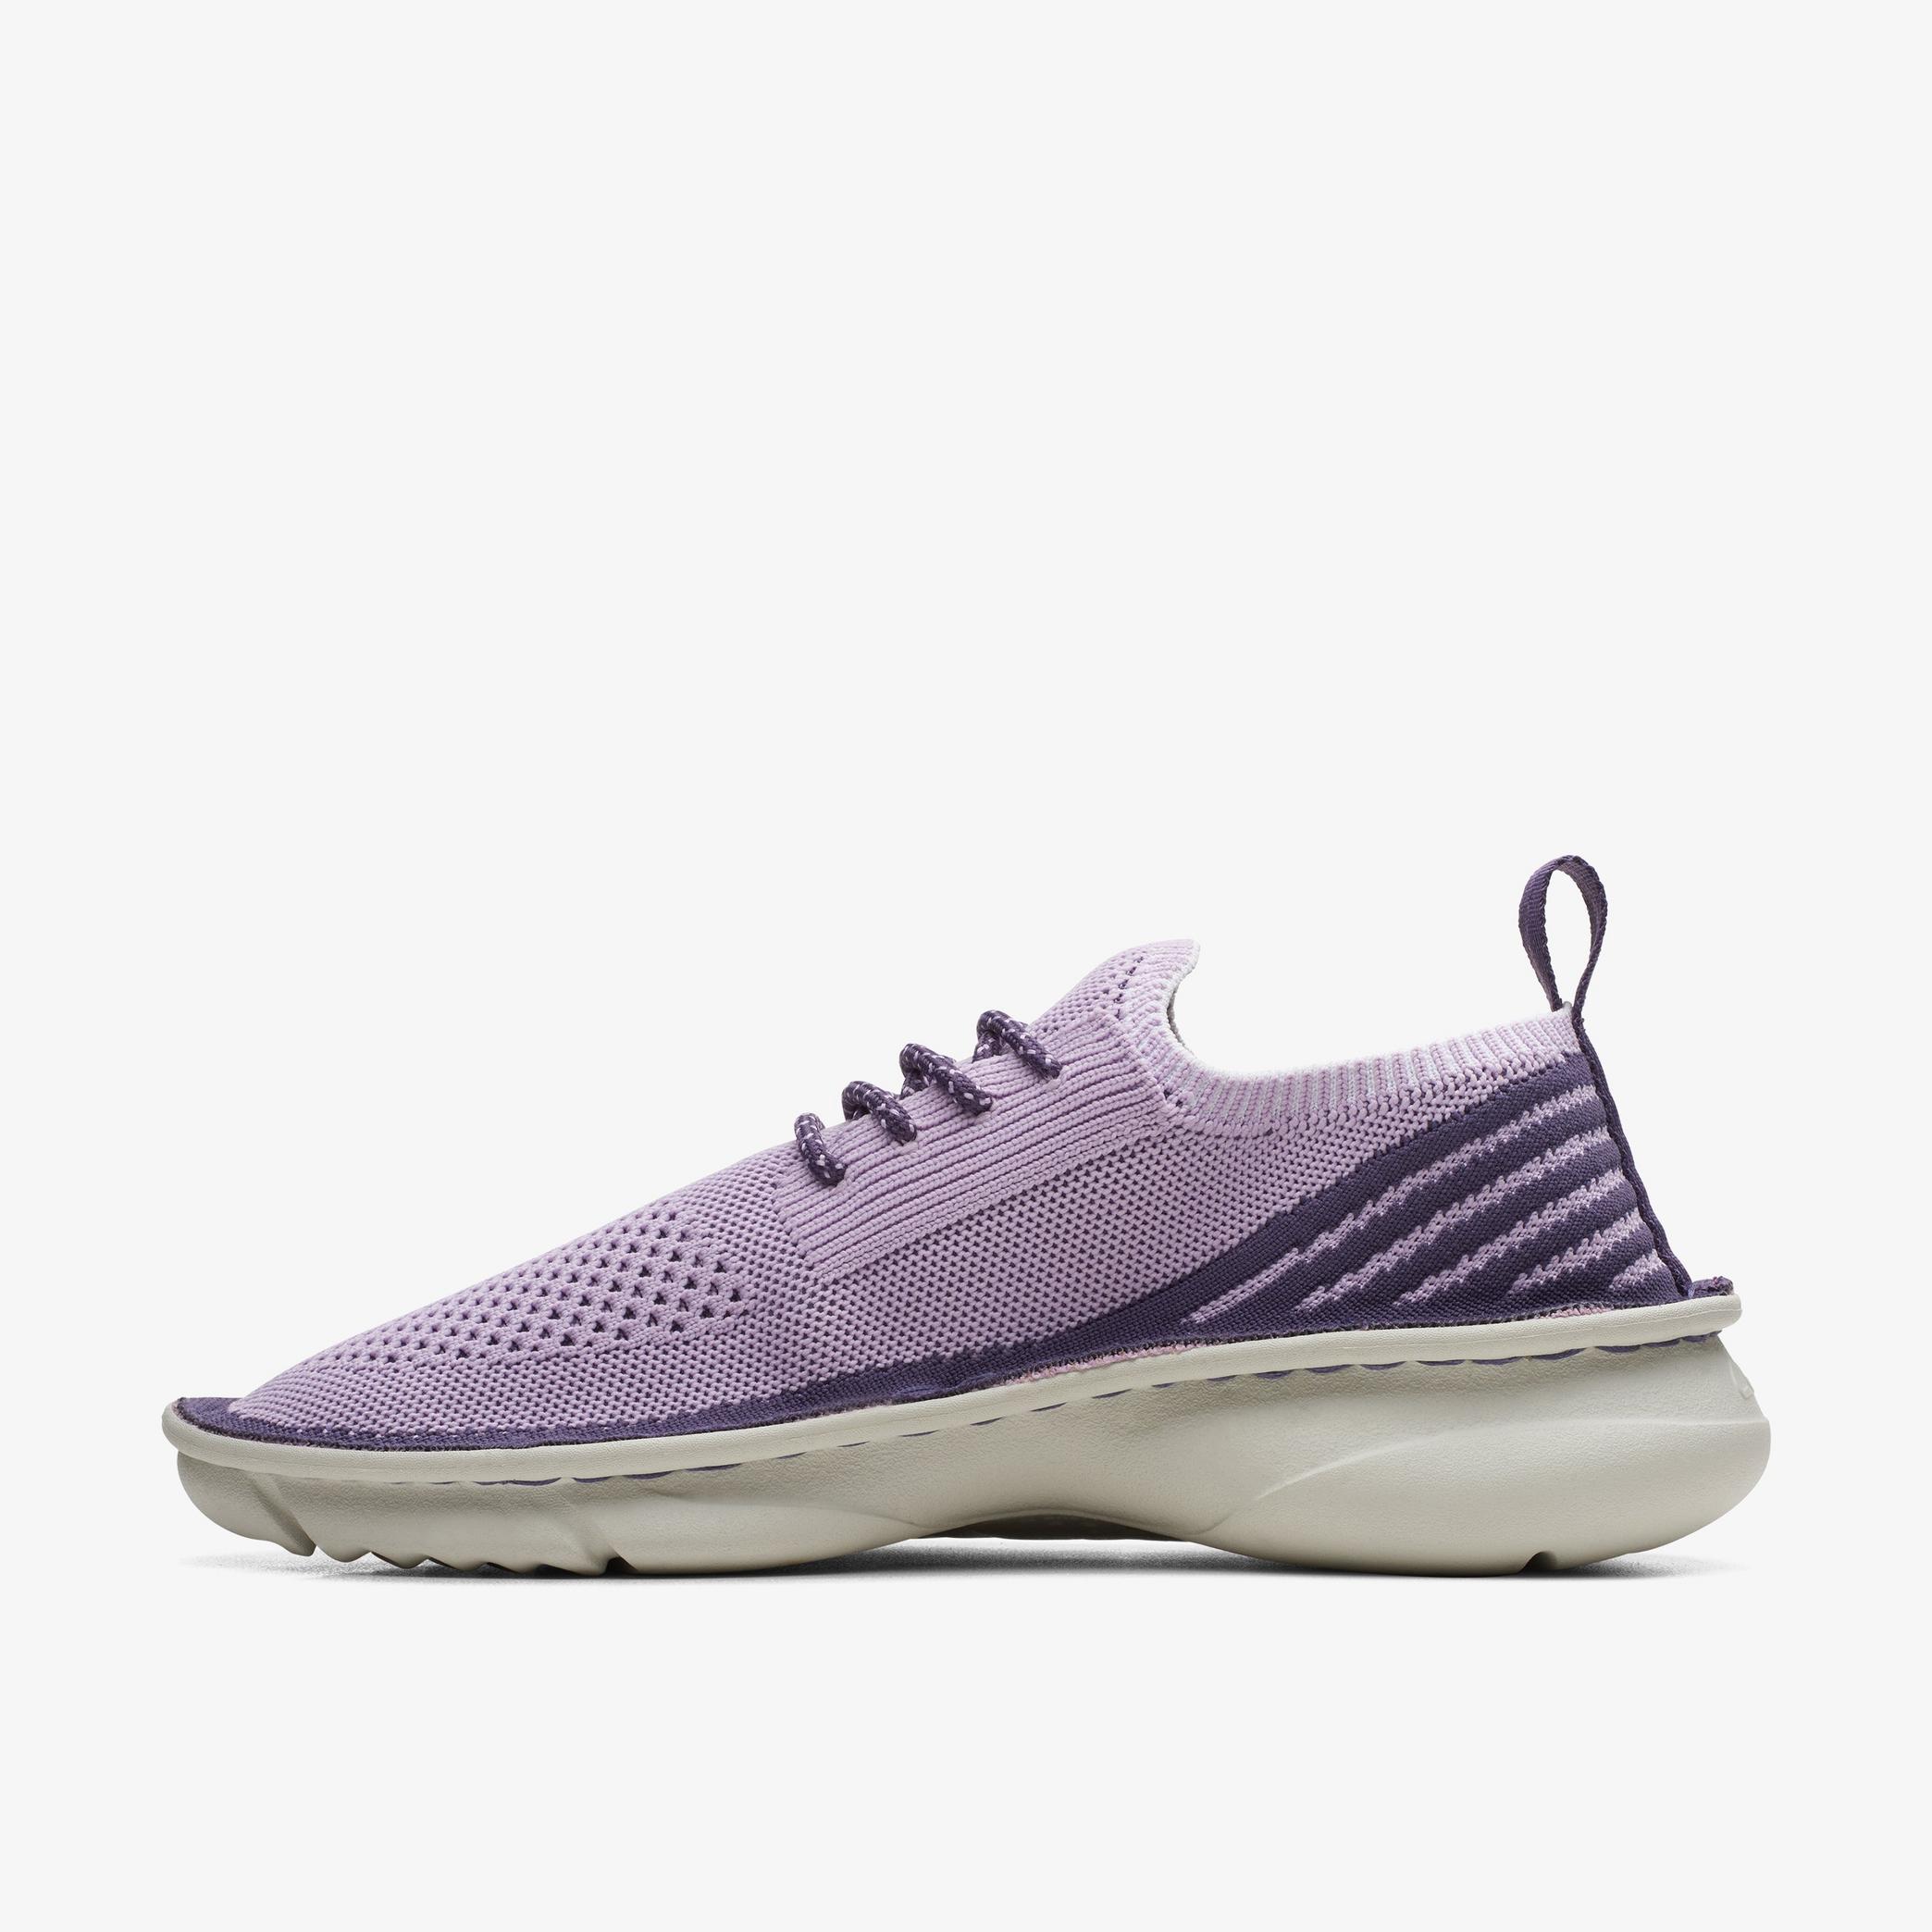 Clarks Origin2 Lavender Knit Trainers, view 2 of 6